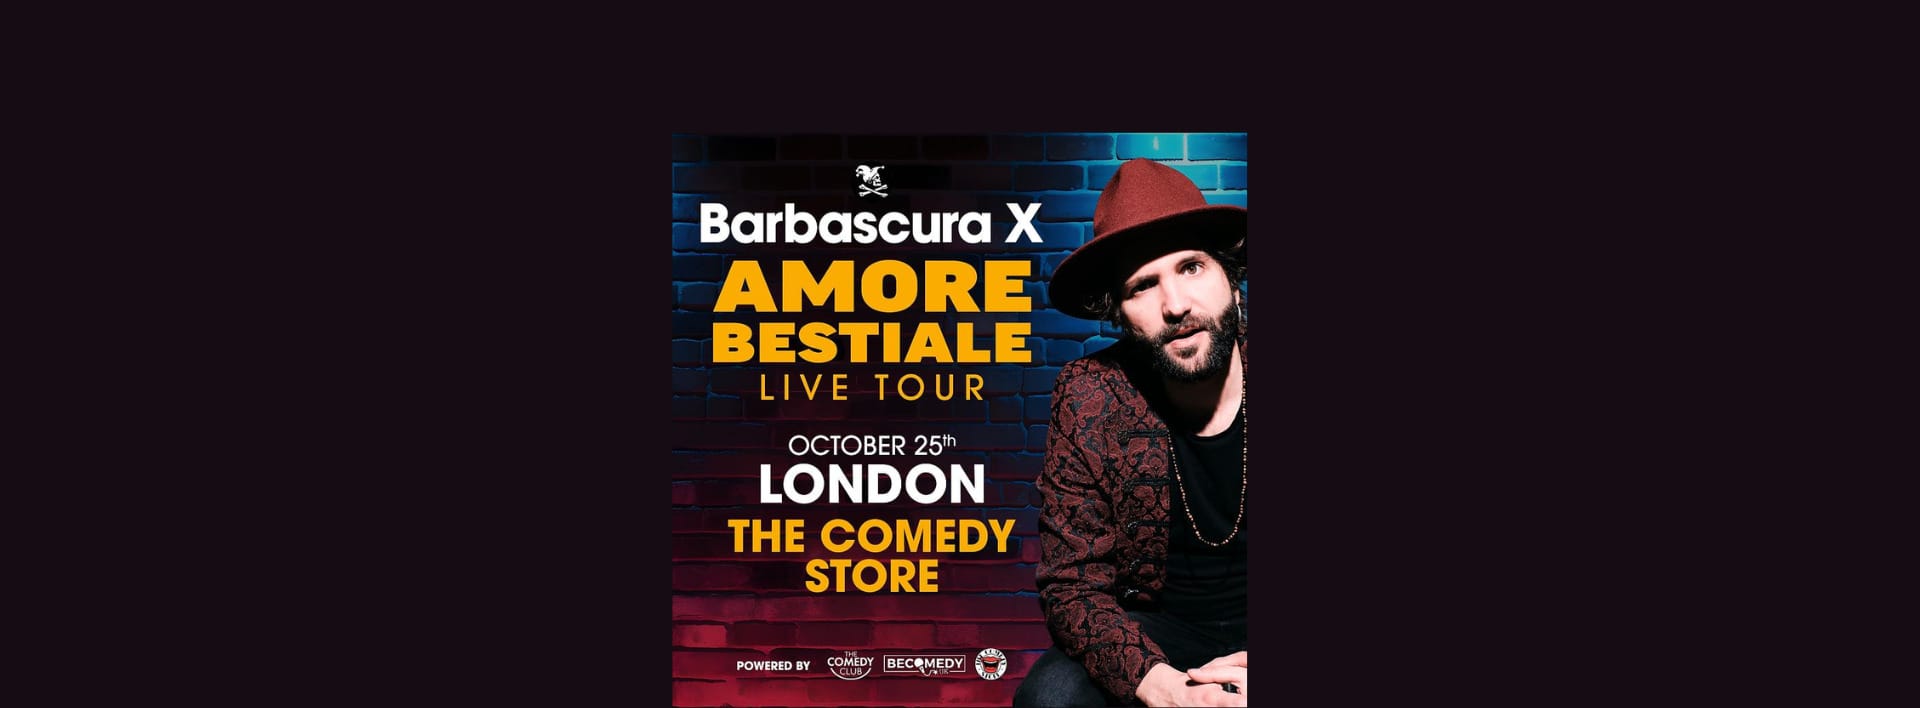 BARBASCURA X: Amore Bestiale - London